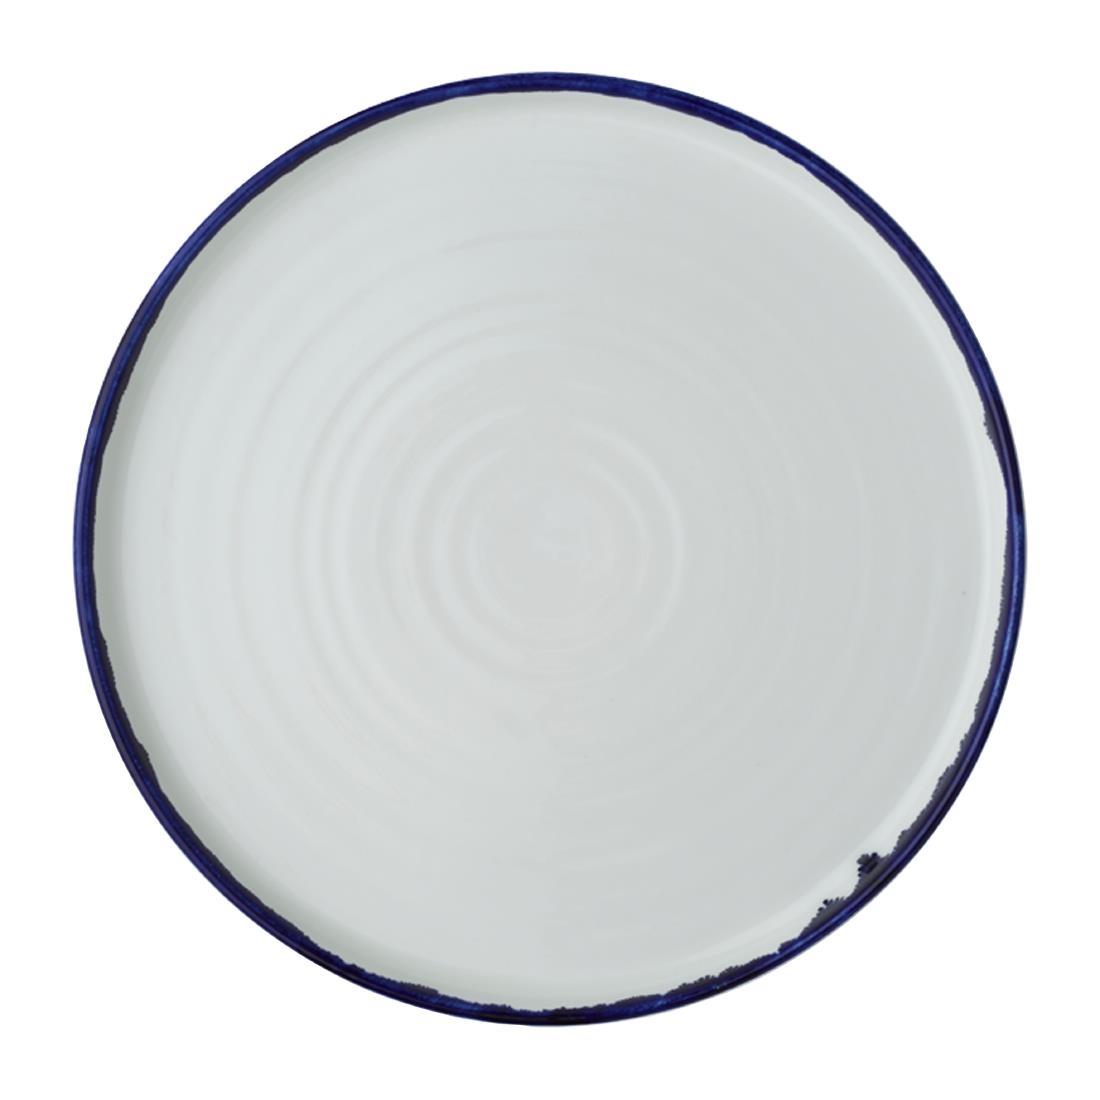 Dudson Harvest Walled Plates Ink 260mm (Pack of 6) - FX153  - 1